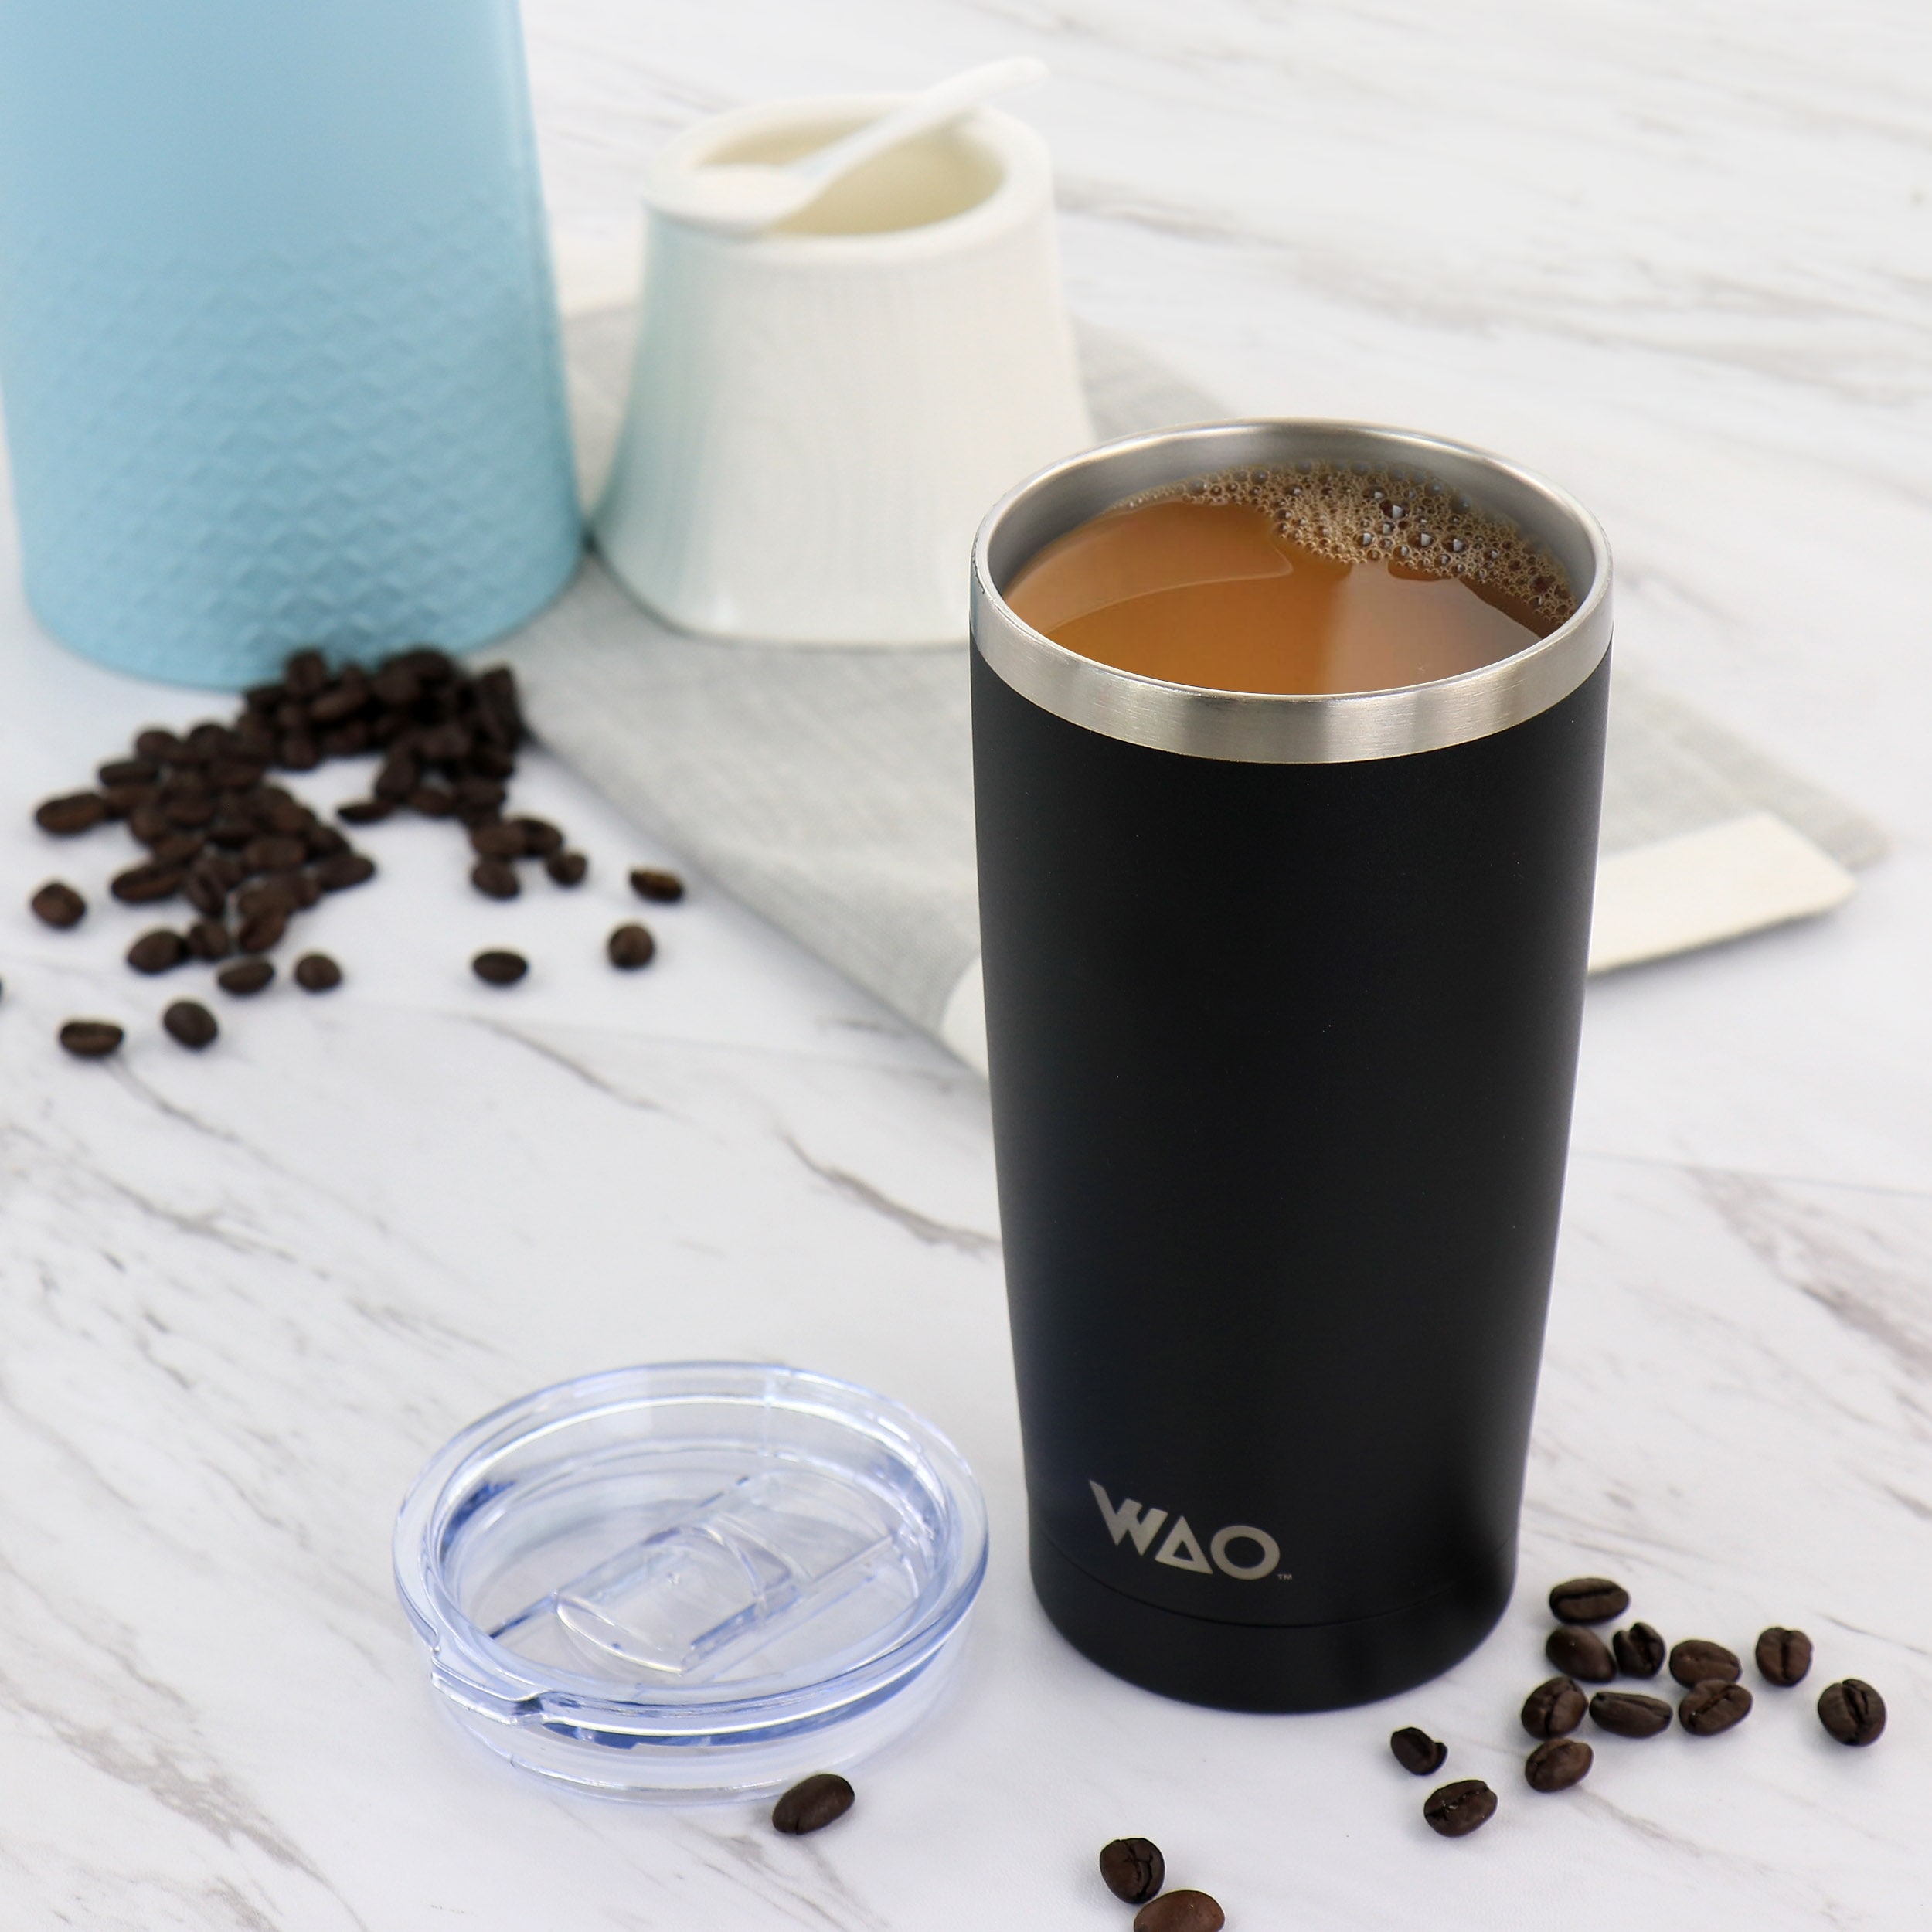 https://ak1.ostkcdn.com/images/products/is/images/direct/e94e1b8b2dd50c0941586844f72ecee22b14c328/WAO-18oz-Thermal-Tumbler-with-Acrylic-Lid-in-Matte-Black.jpg